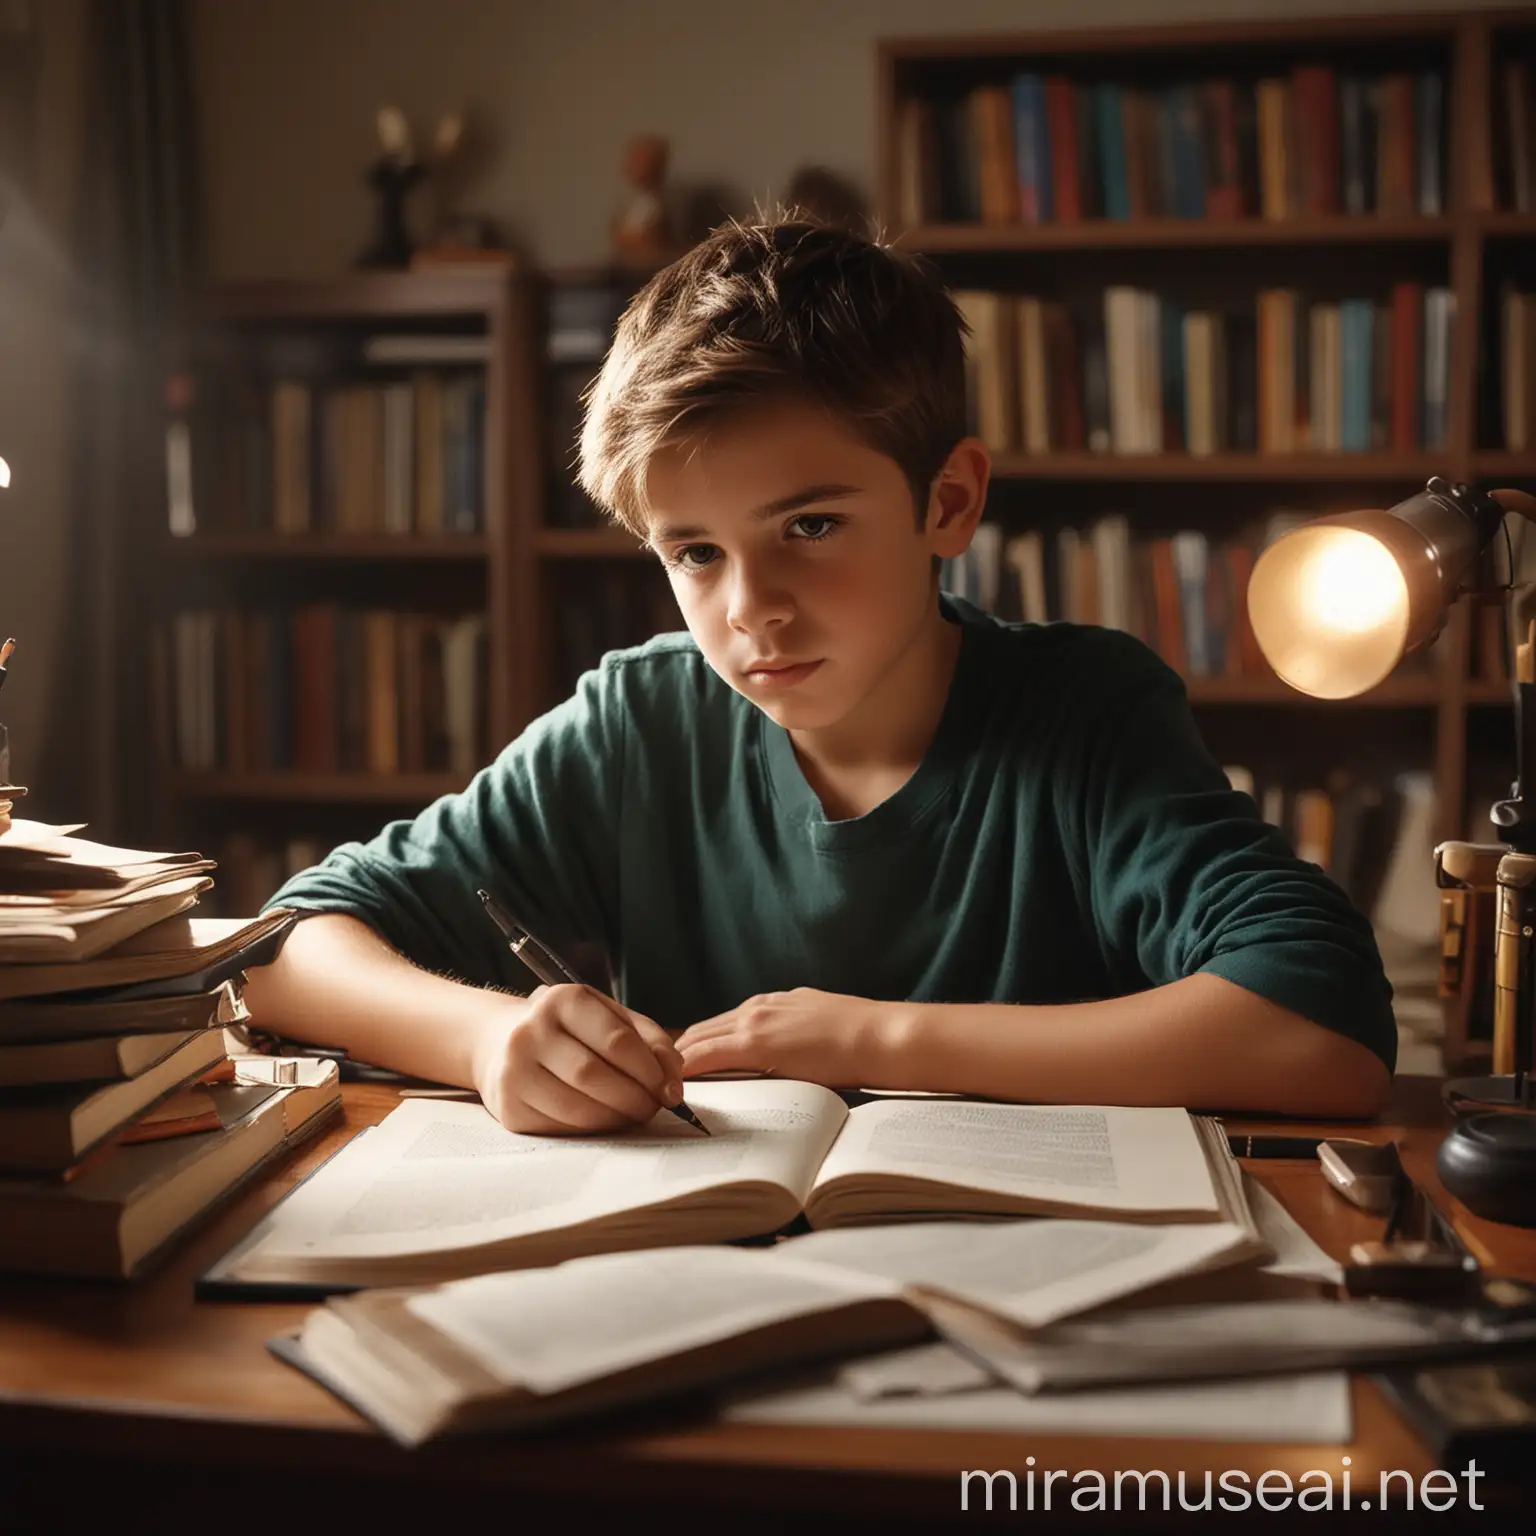 Young Boy Studying at Desk with Books and Study Materials